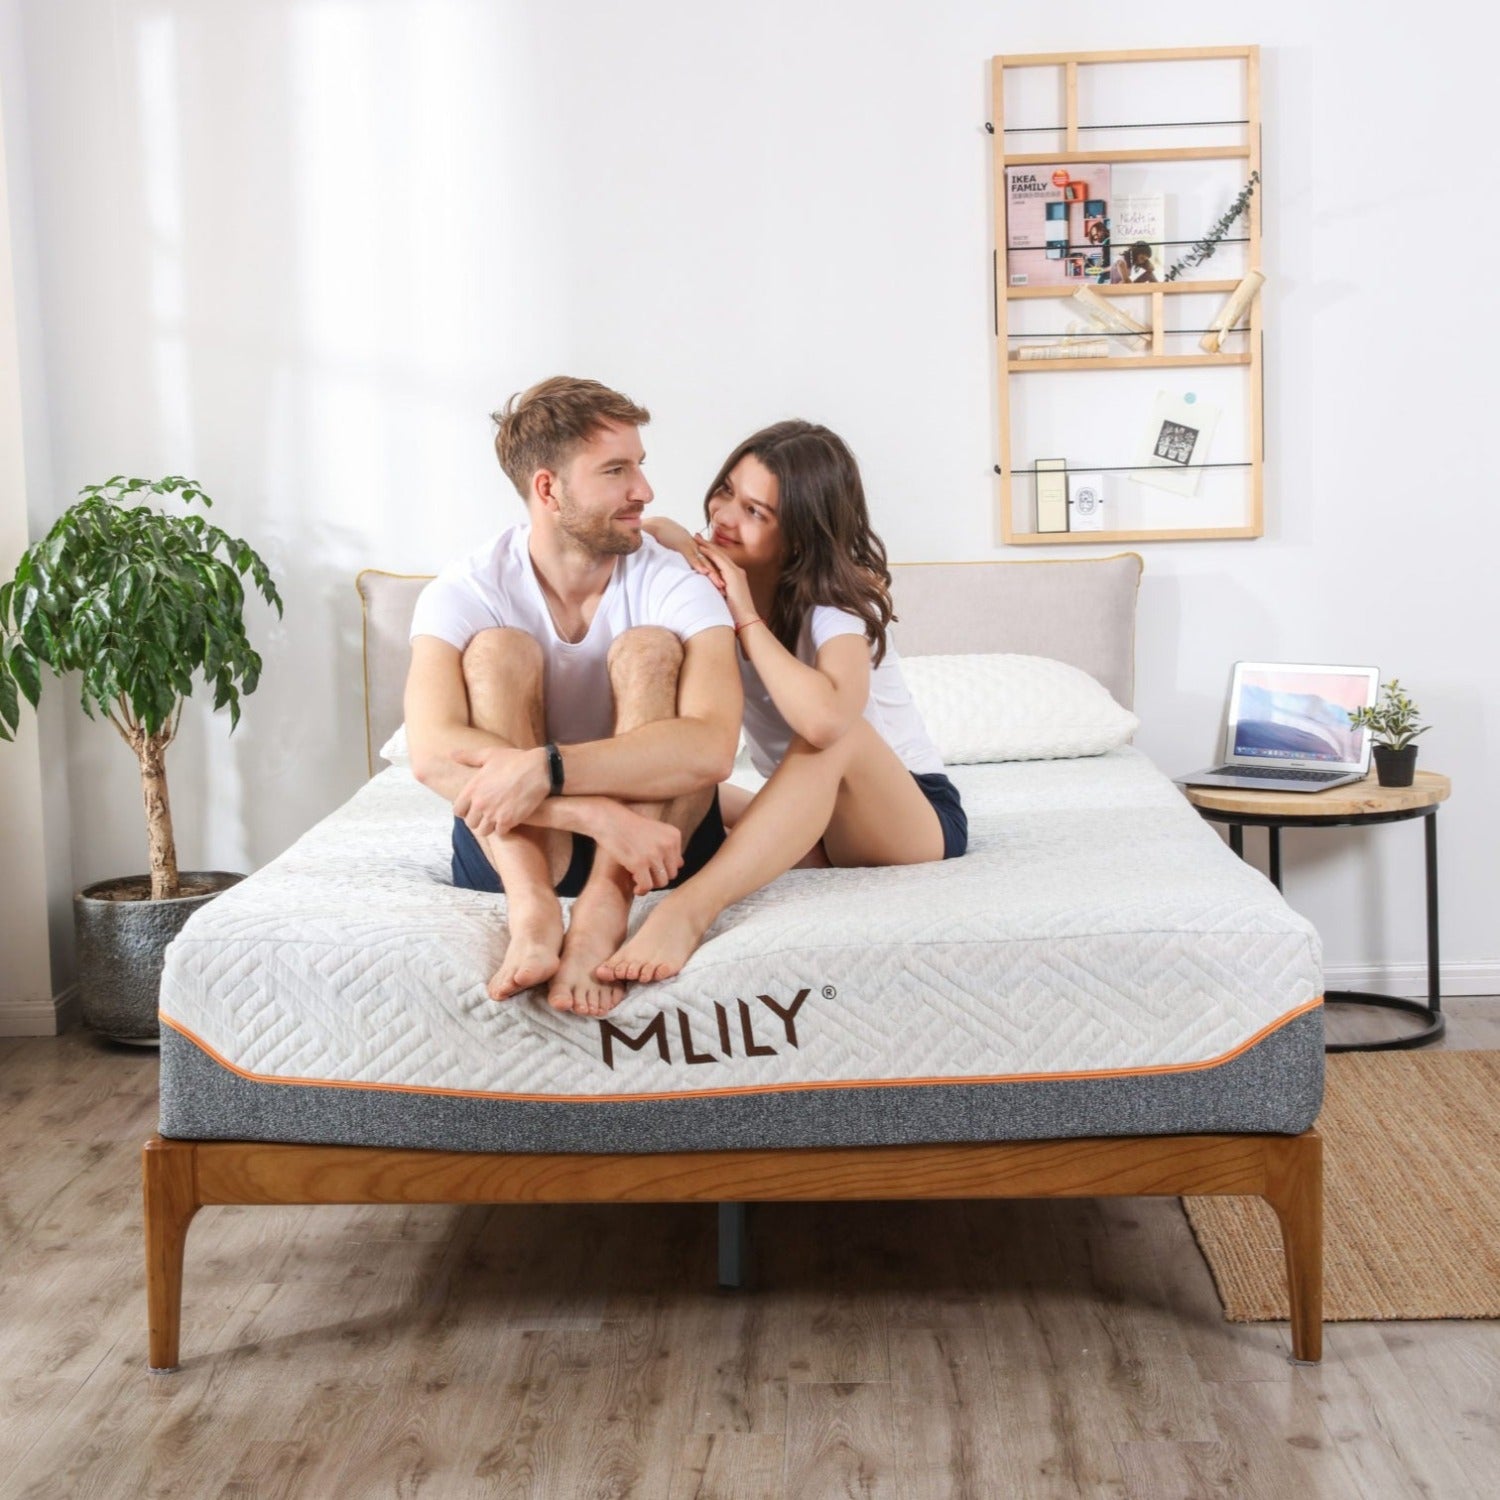 MLILY Fusion Supreme Mattress at Luxurious Beds and Linens